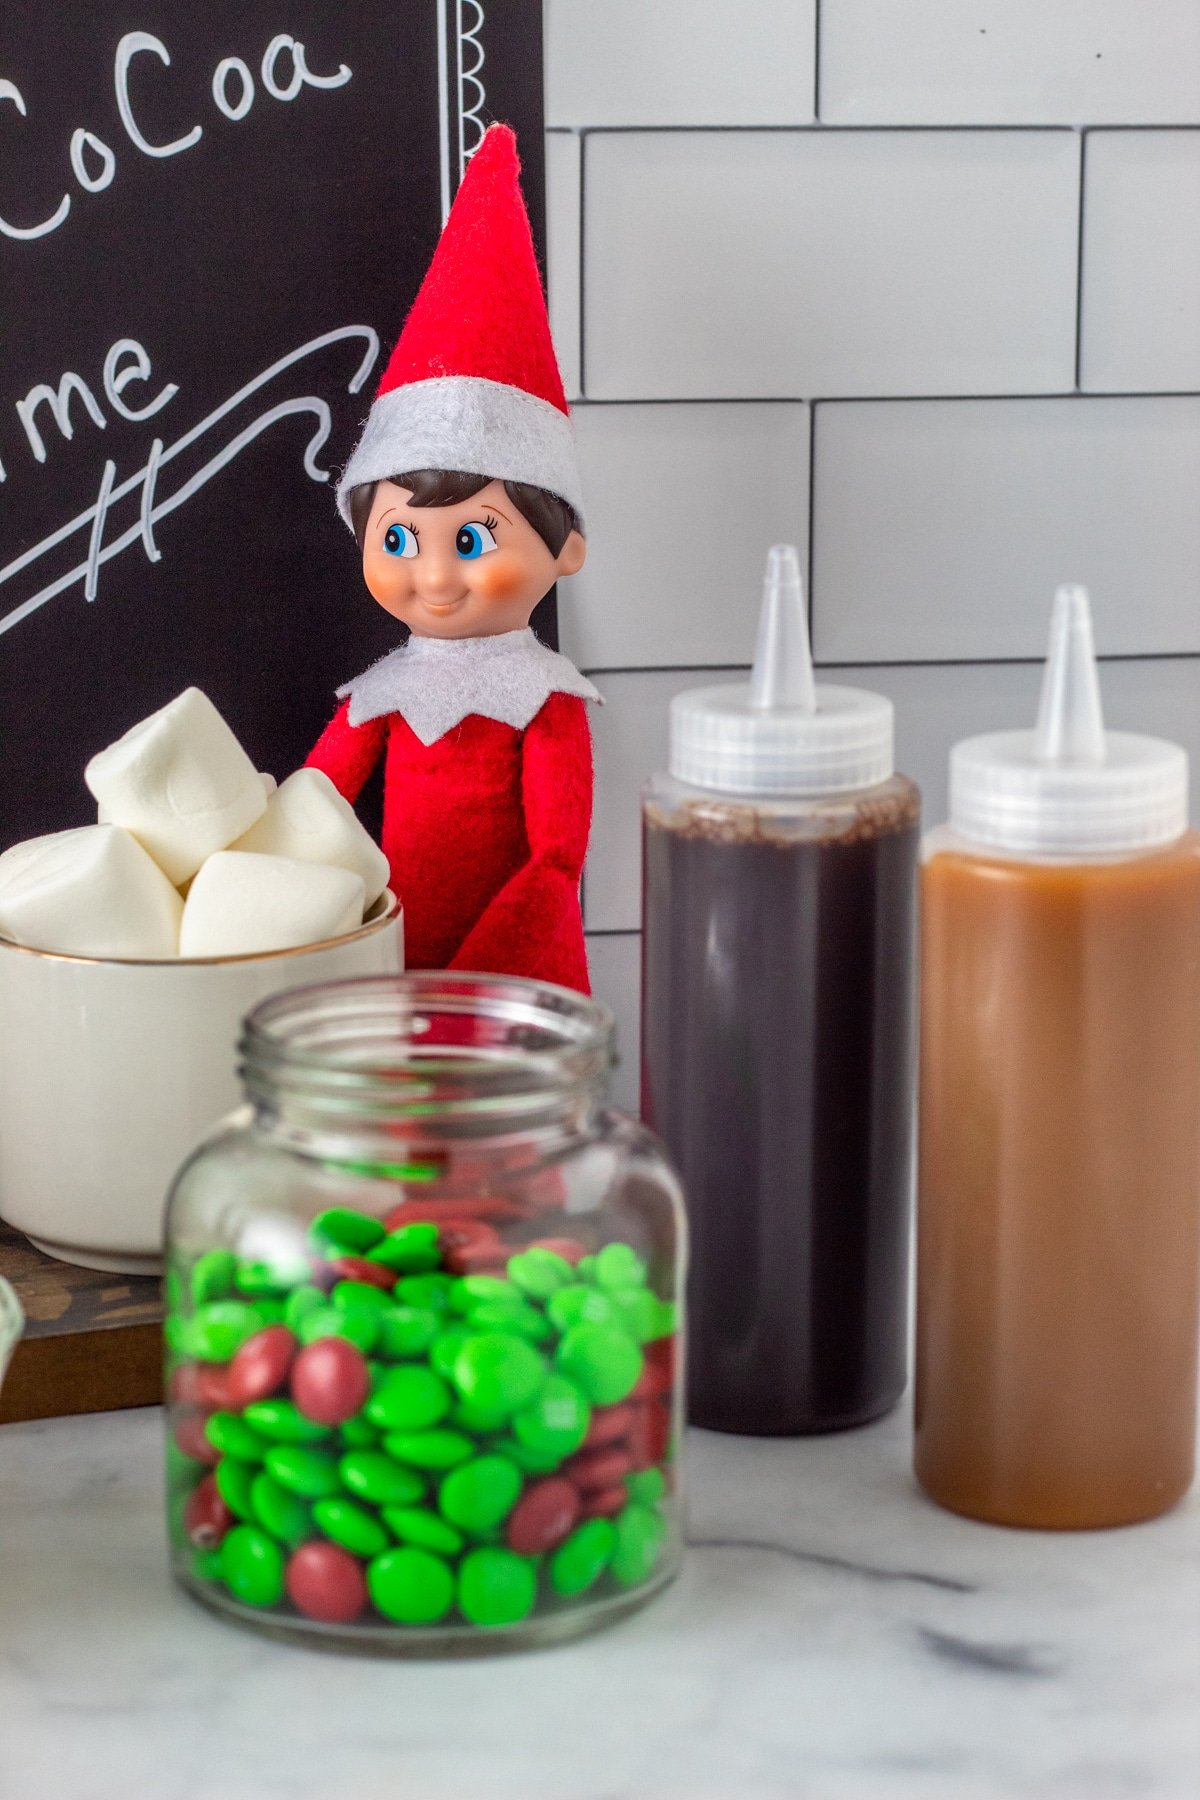 Chocolate and caramel syrups in bottles with Elf on the Shelf in hot cocoa bar